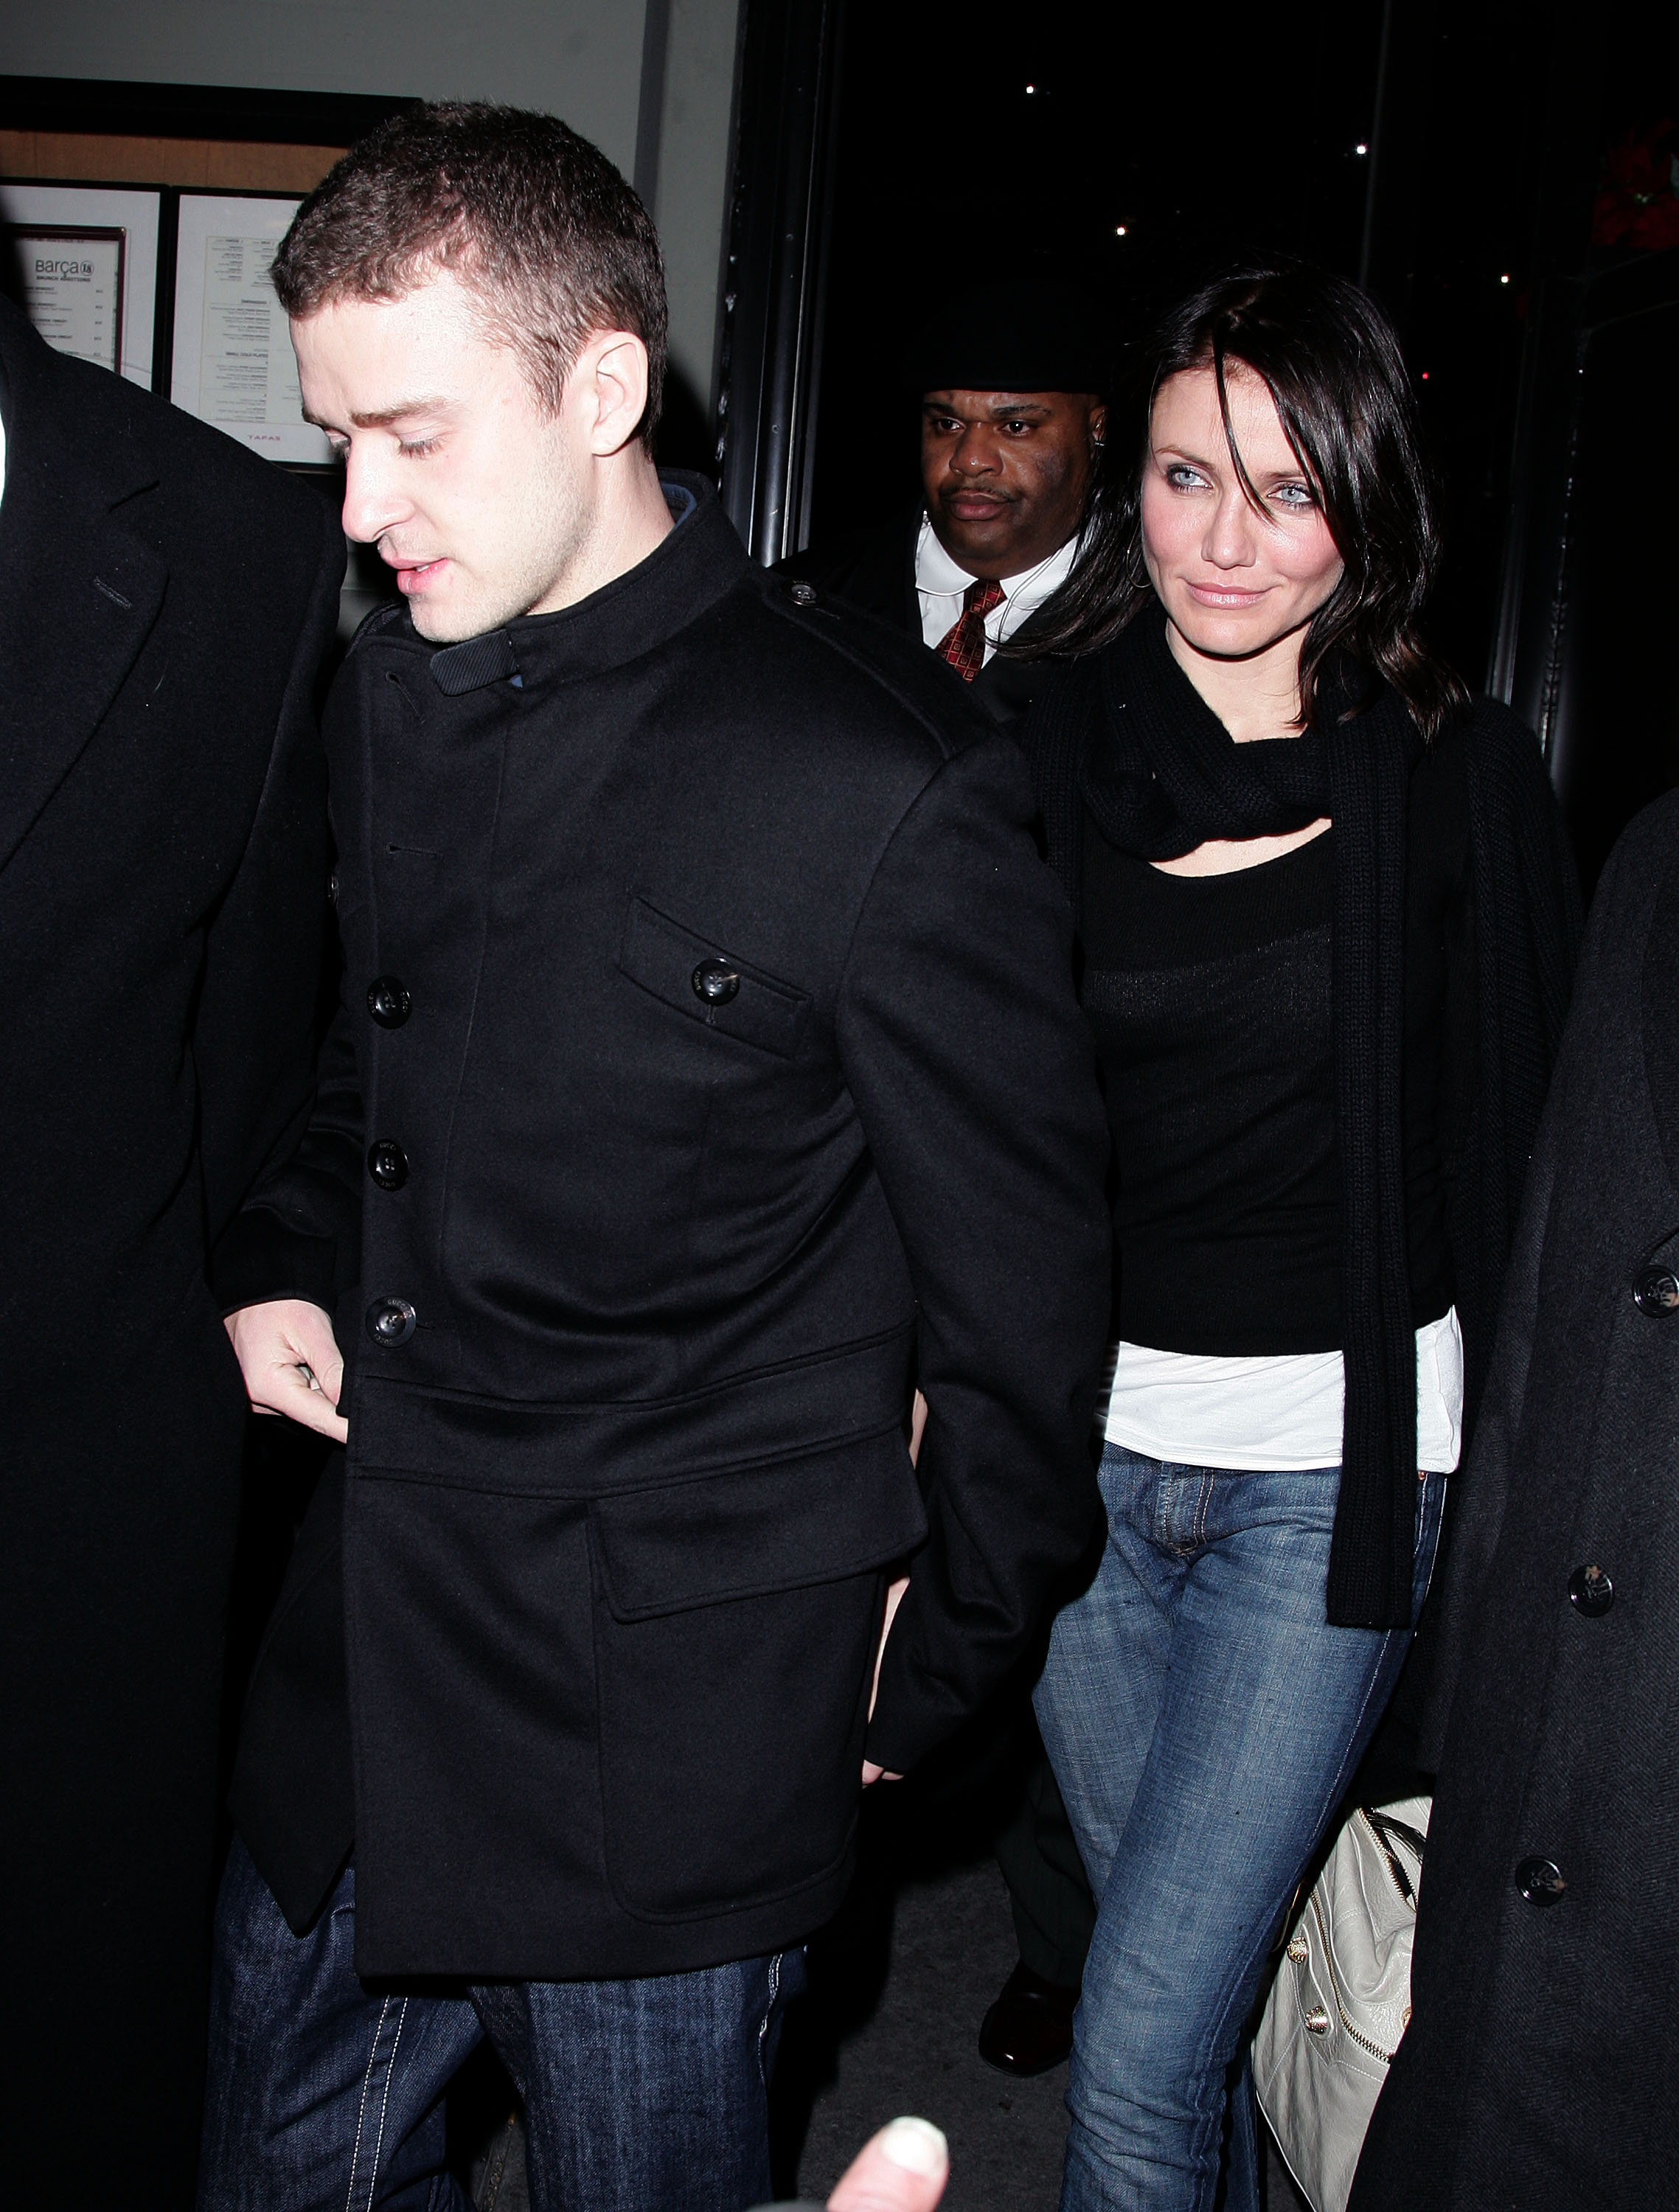 Justin and Cameron walking, he in a black coat and jeans and she in a dark jacket and jeans